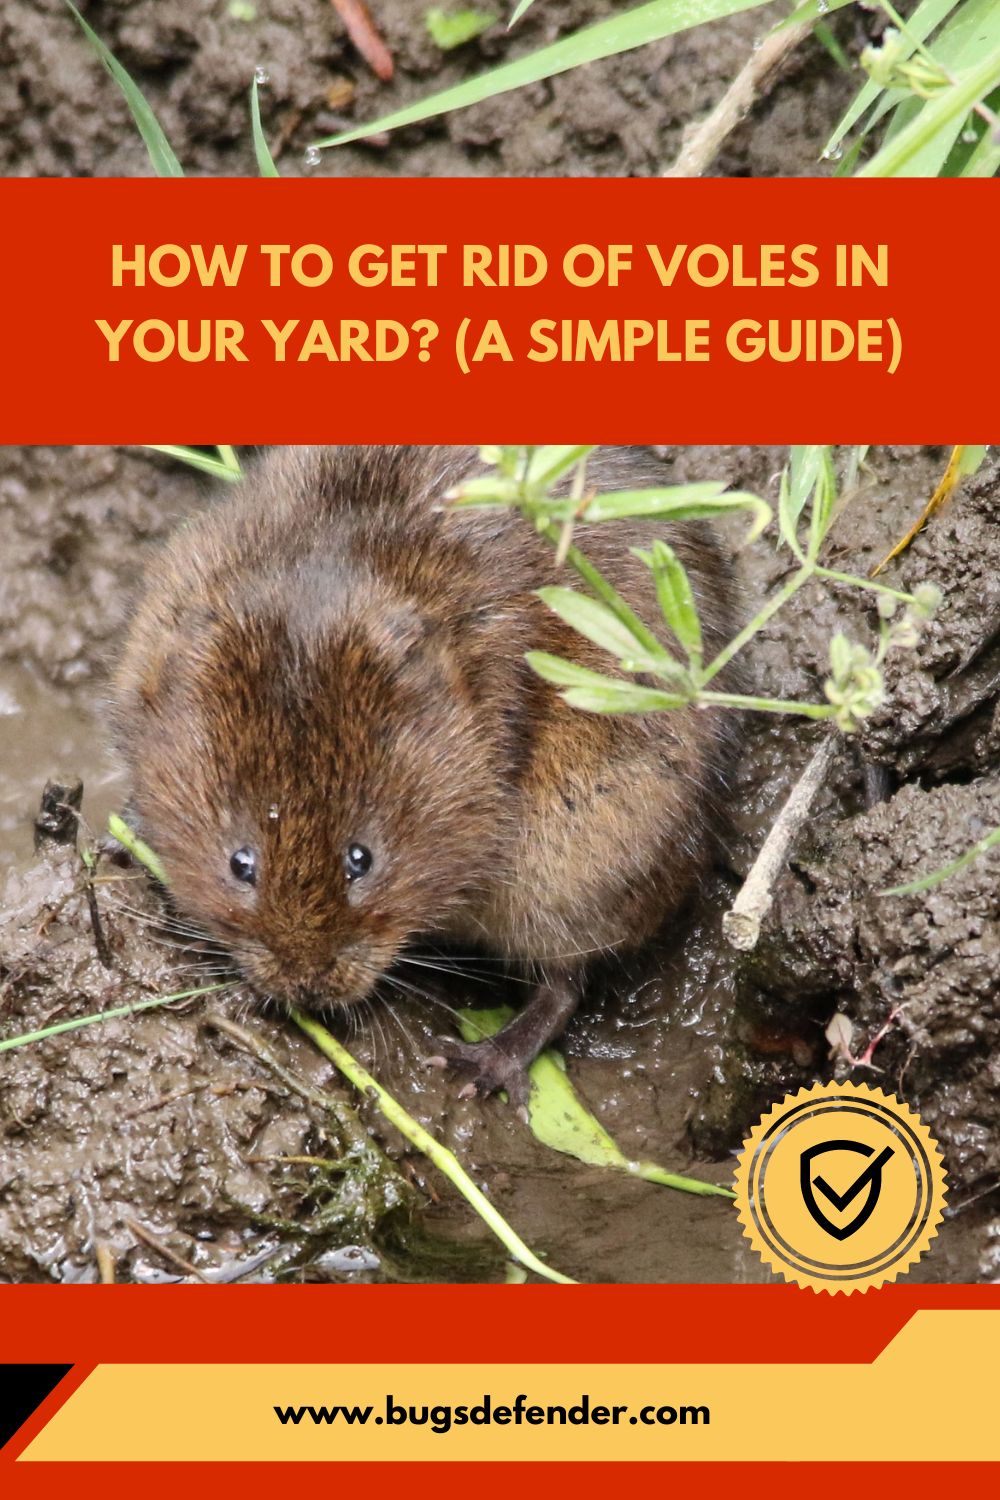 How To Get Rid Of Voles In Your Yard (A Simple Guide) pin1